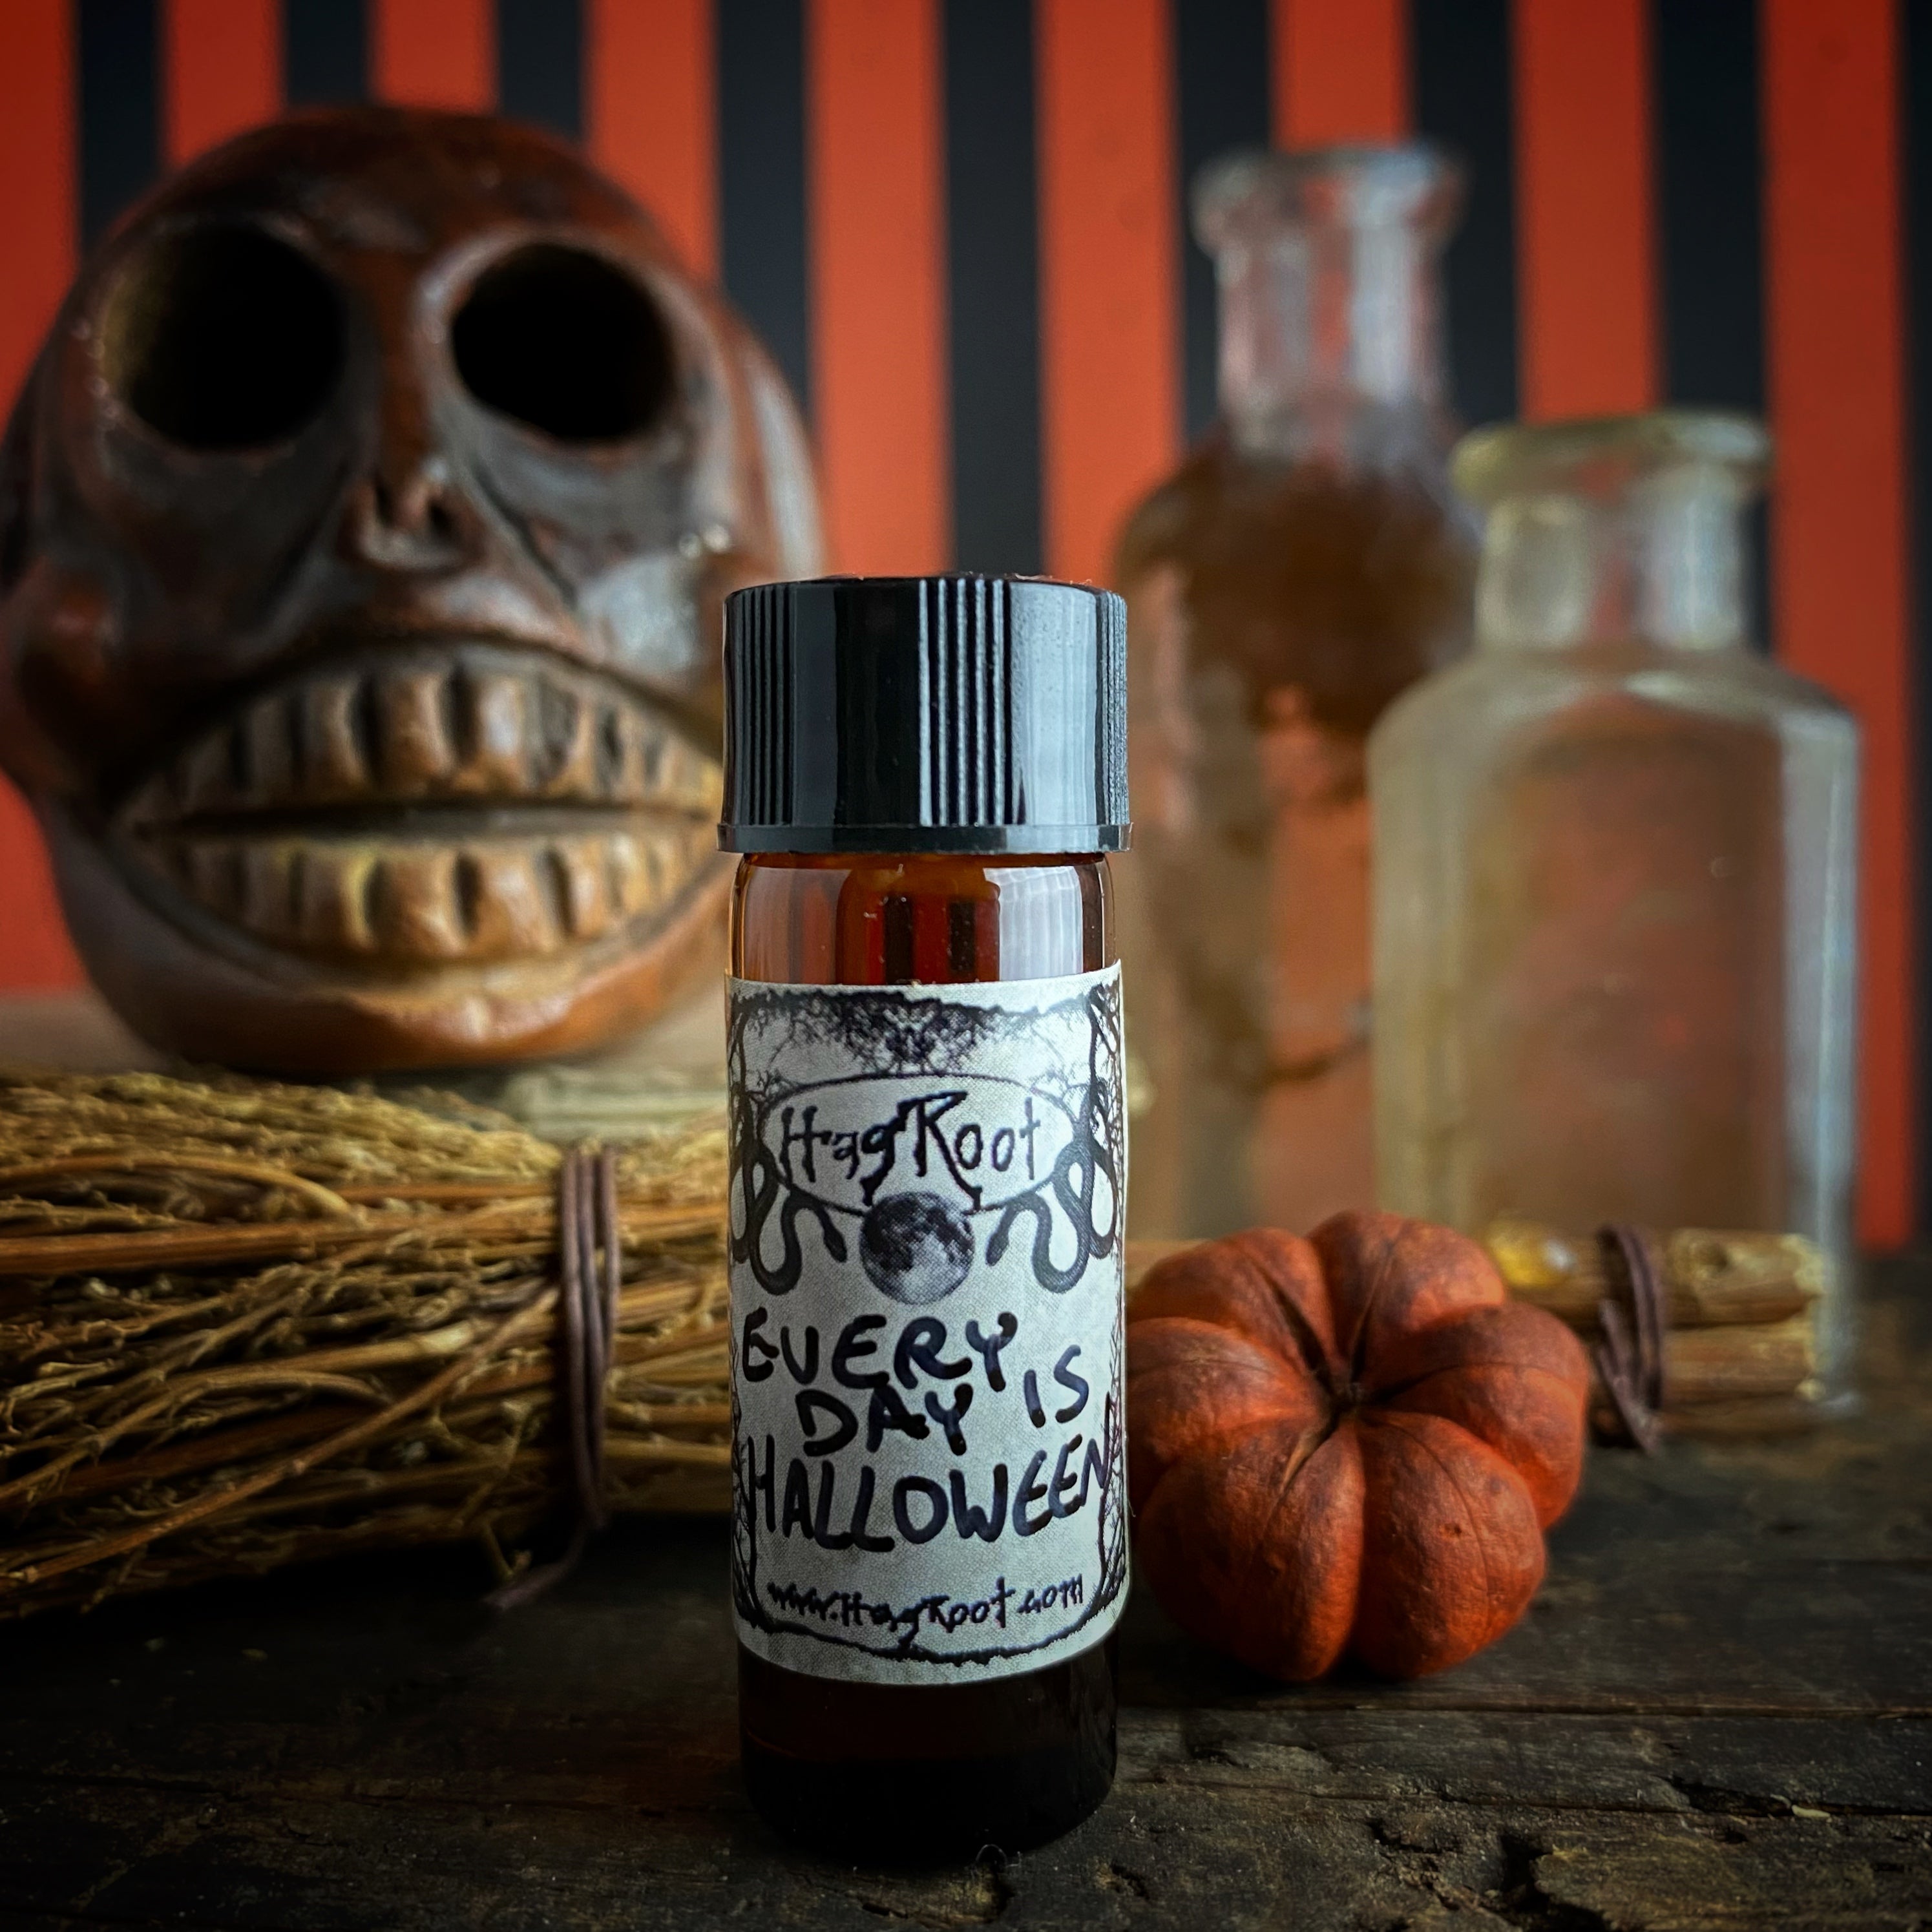 EVERY DAY IS HALLOWEEN-(Pumpkin, Patchouli, Candy, Spice, Dark Woods)-Perfume, Cologne, Anointing, Ritual Oil